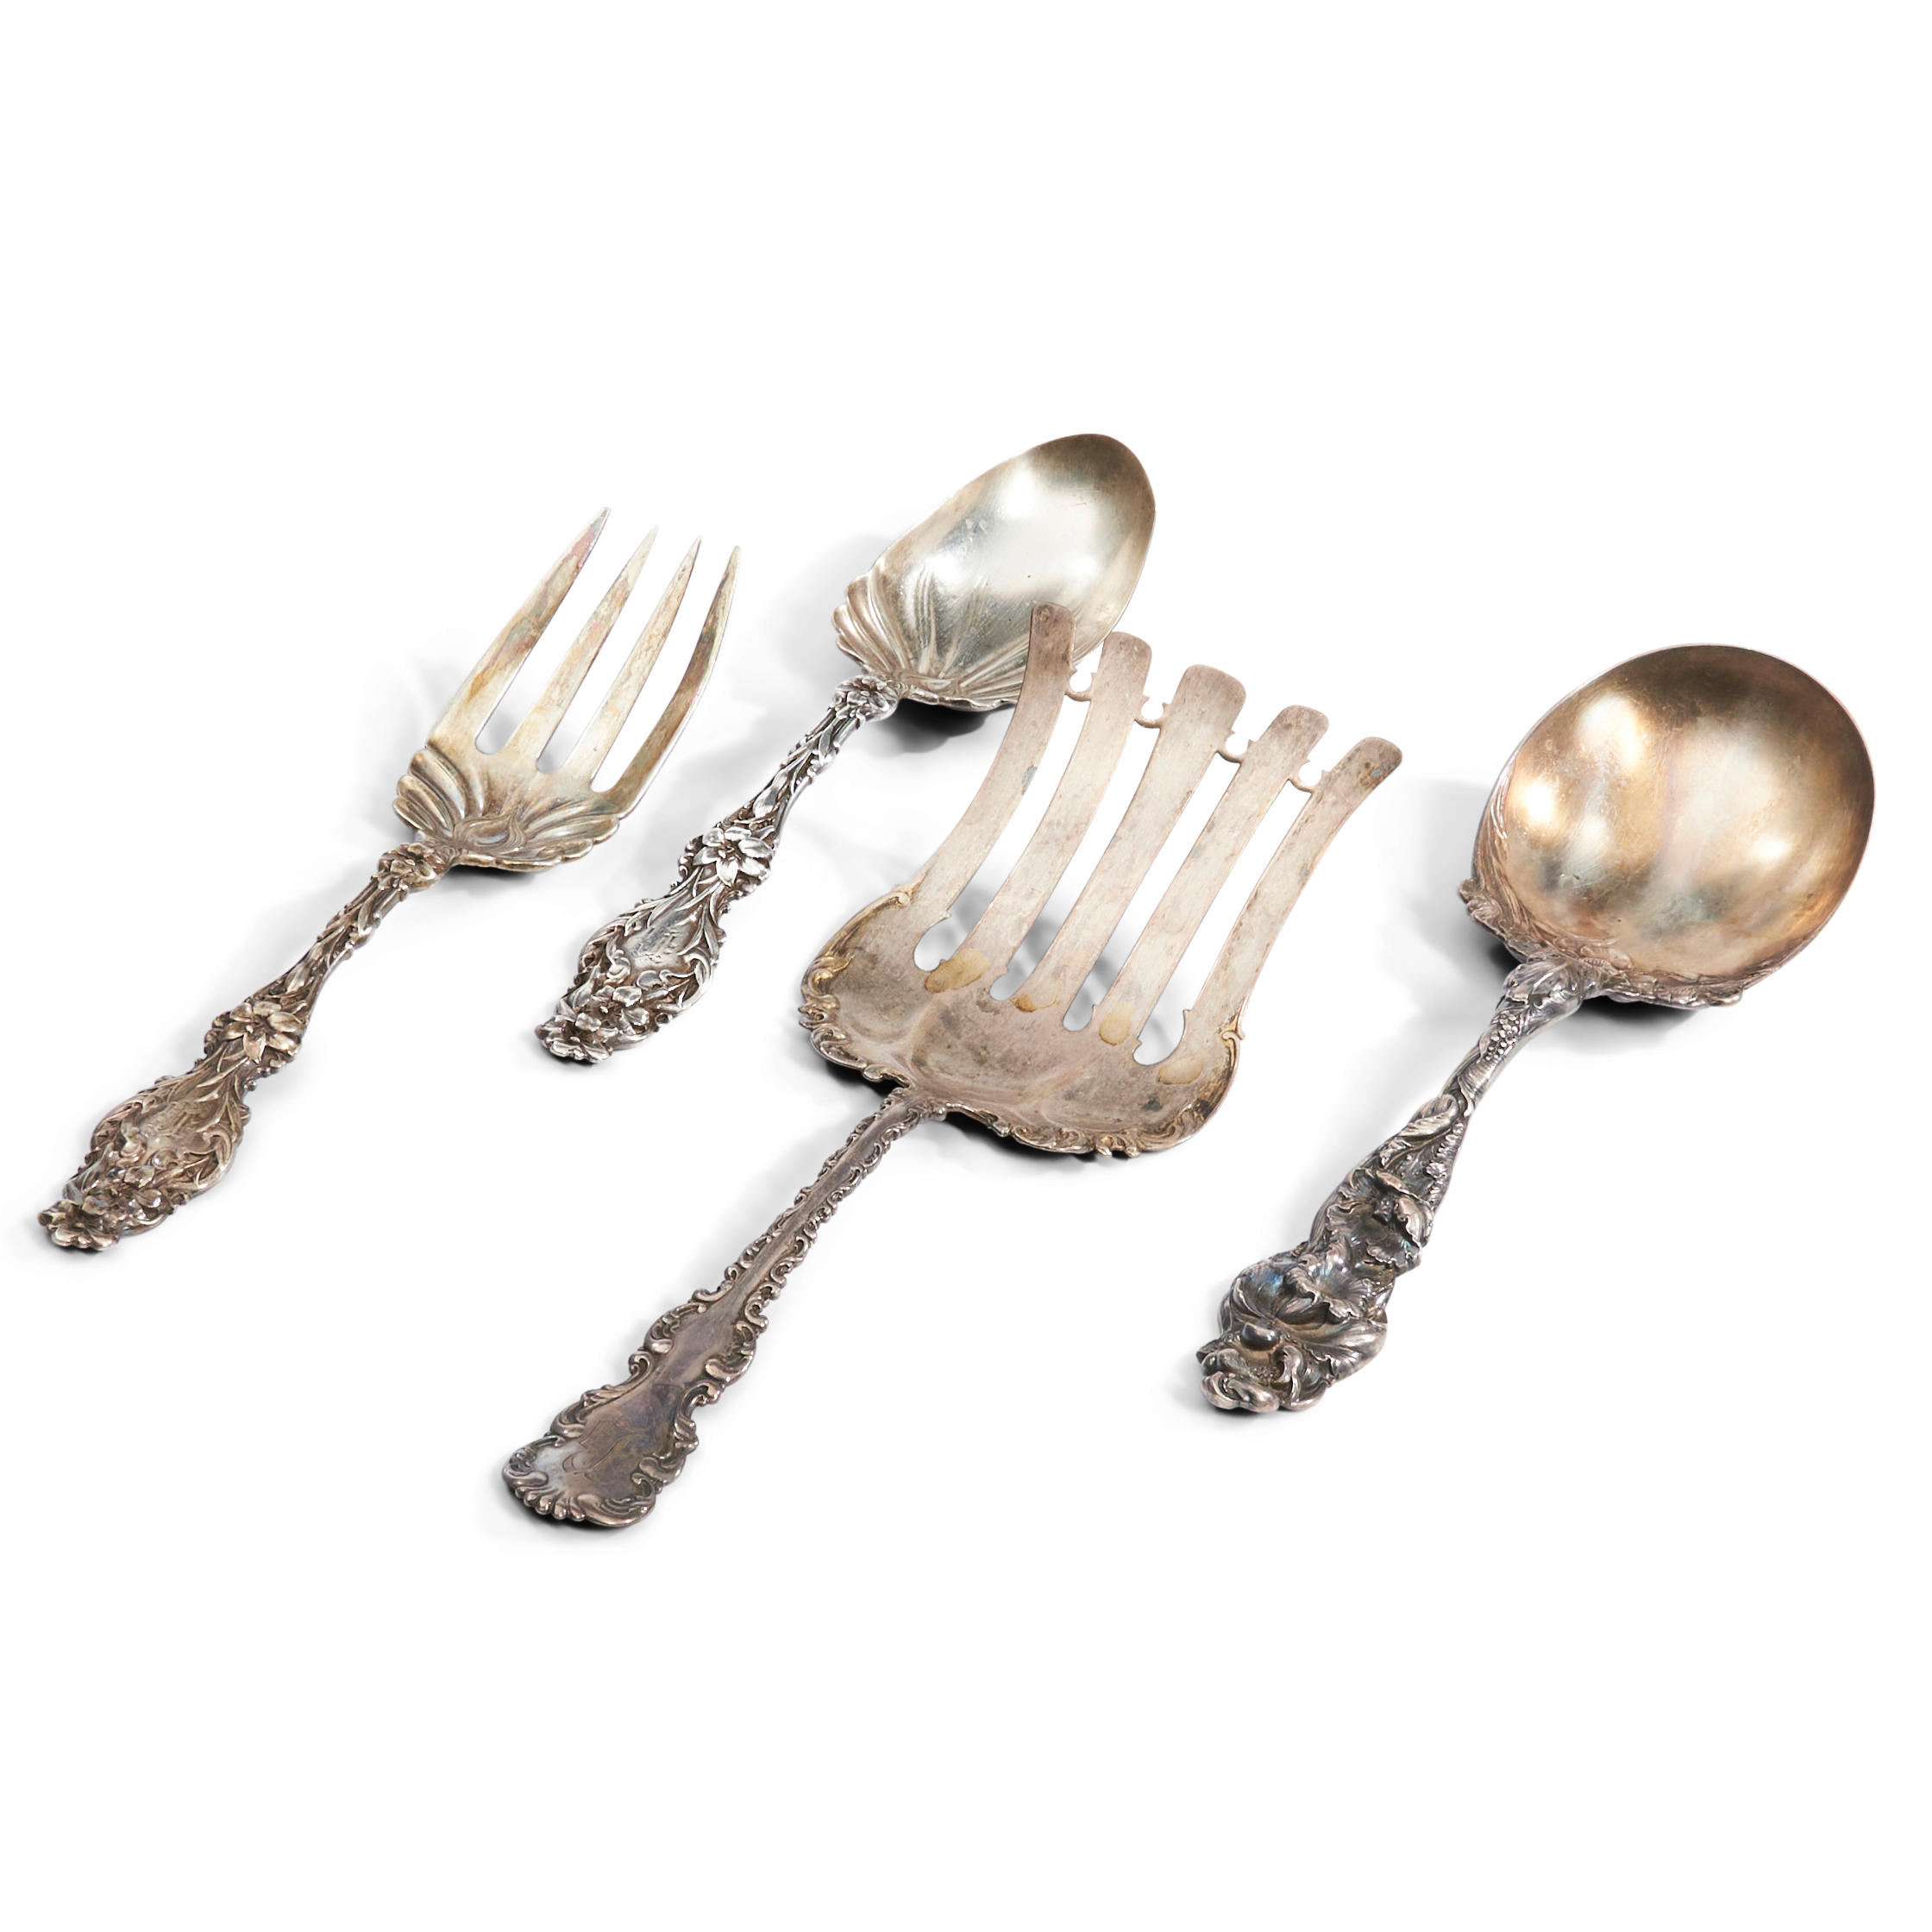 FOUR AMERICAN STERLING SILVER SERVING 3aea2f